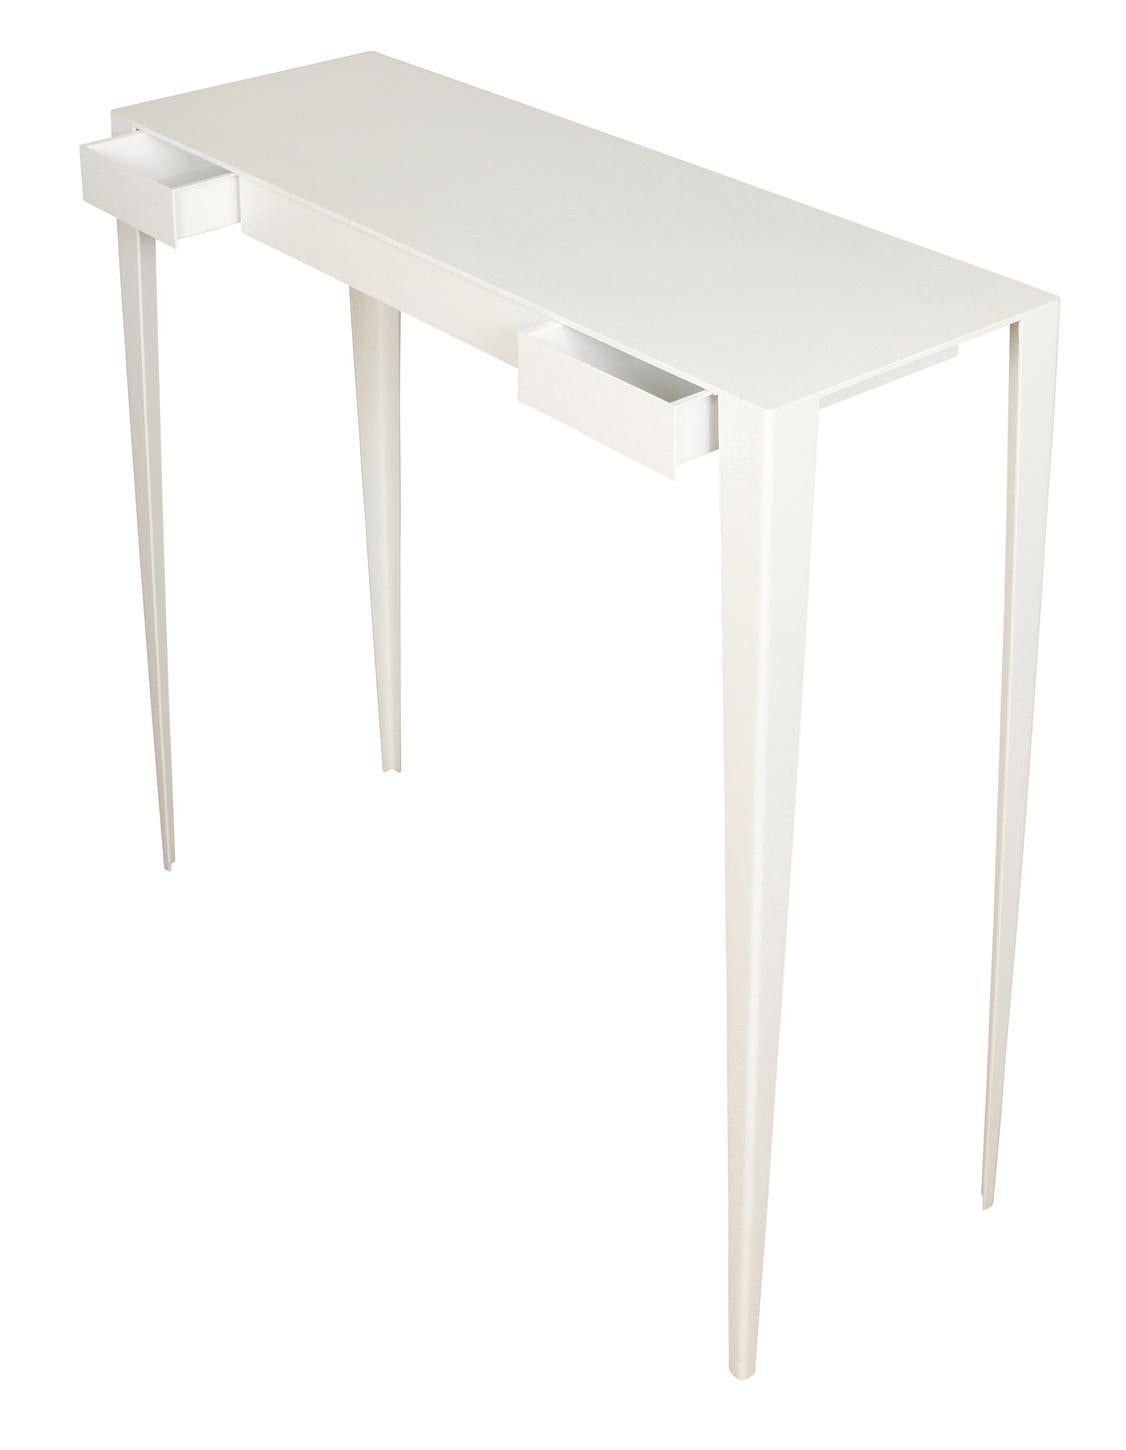 Custom white metal console table or desk in modern style with legs that taper to a narrow shape at the base. Table has two drawers.